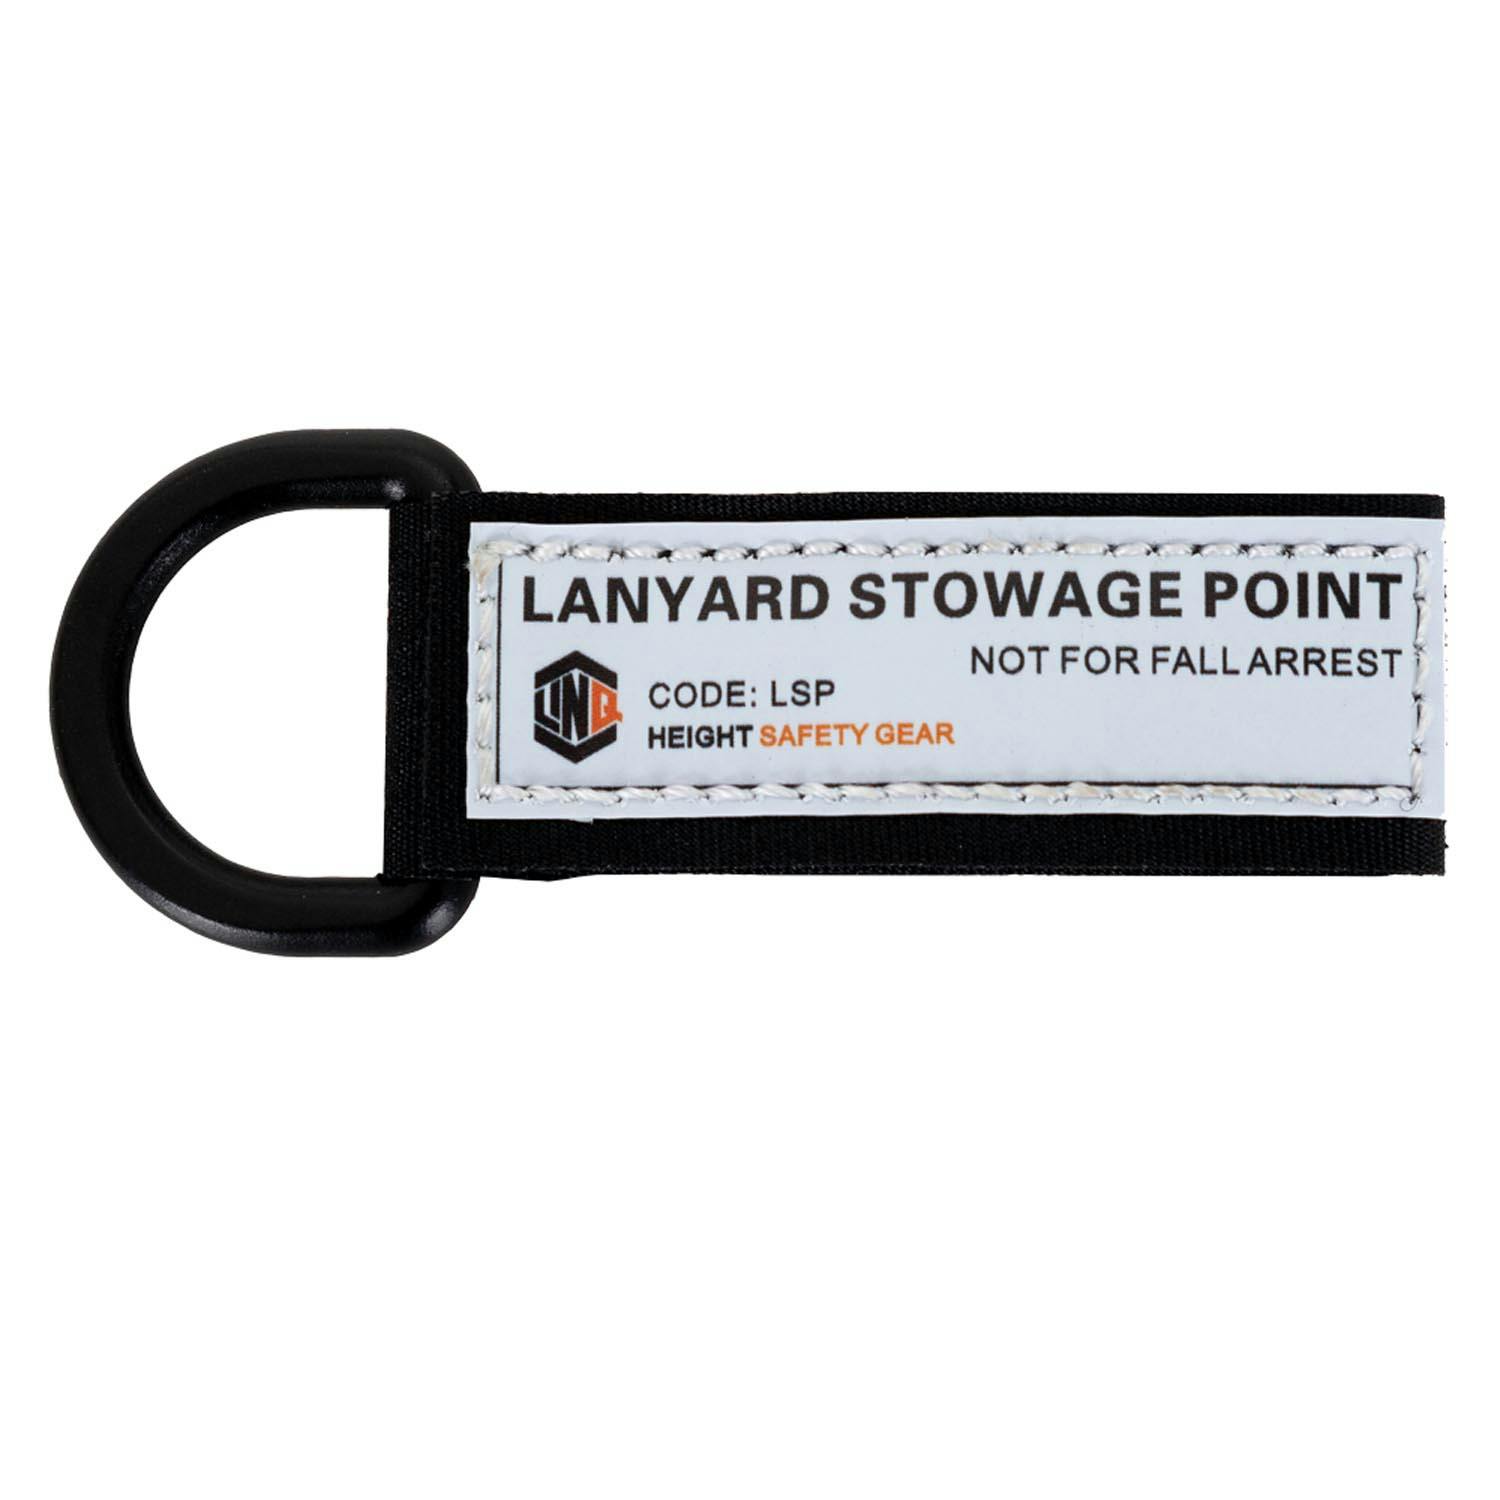 LINQ Lanyard Stowage Point Retro-Fit For Harness